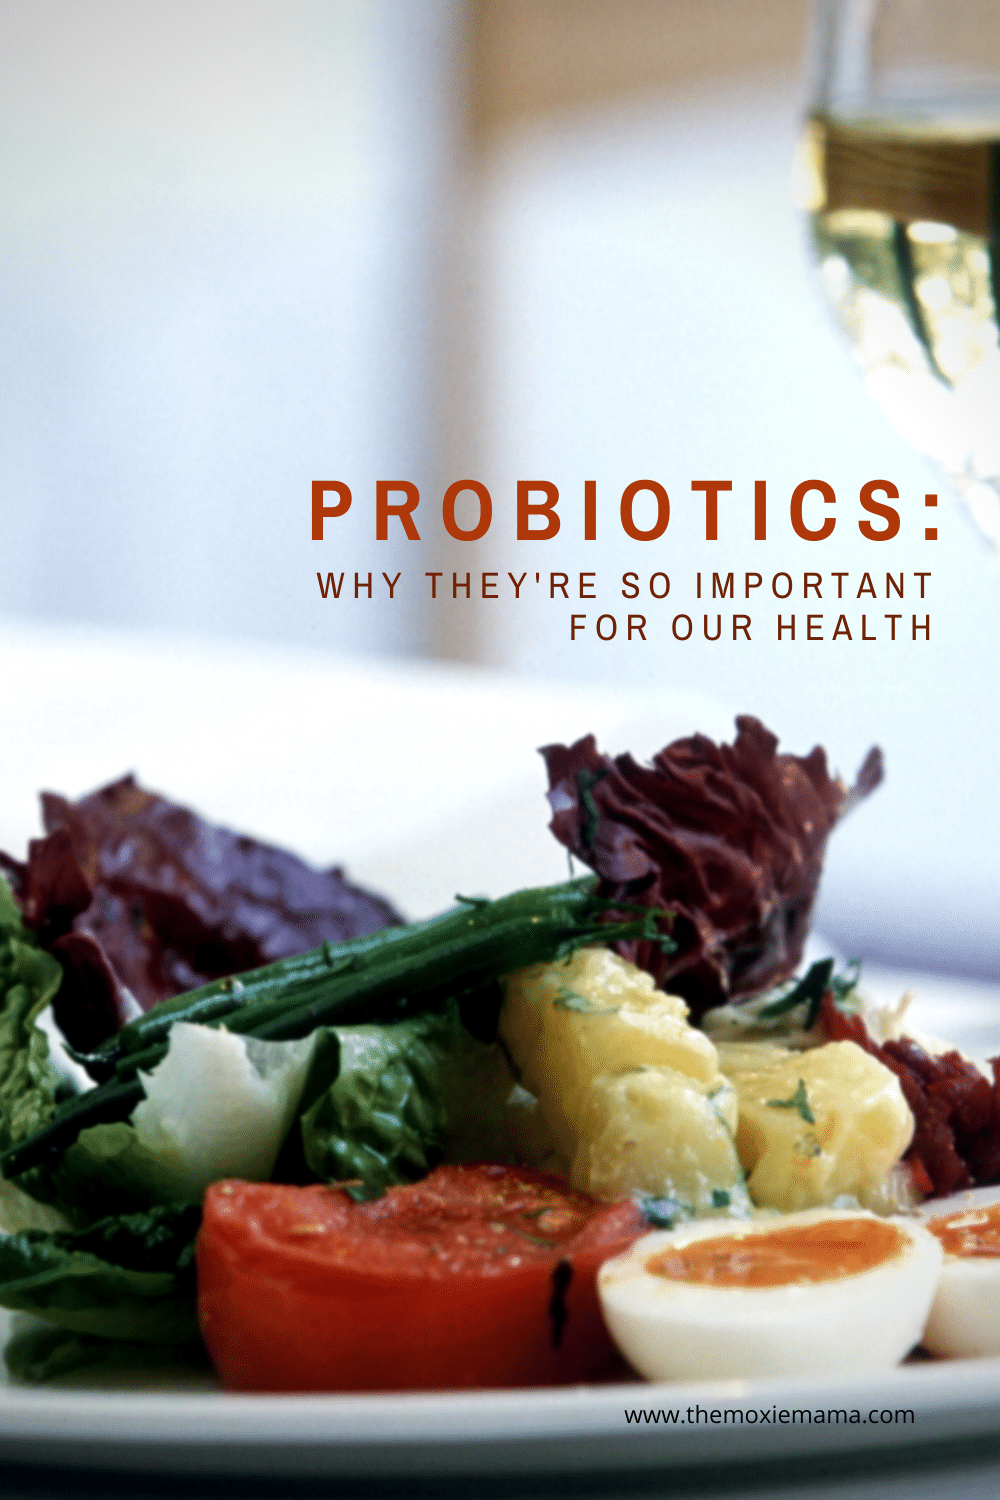 Probiotics Why They're So Important for Our Health